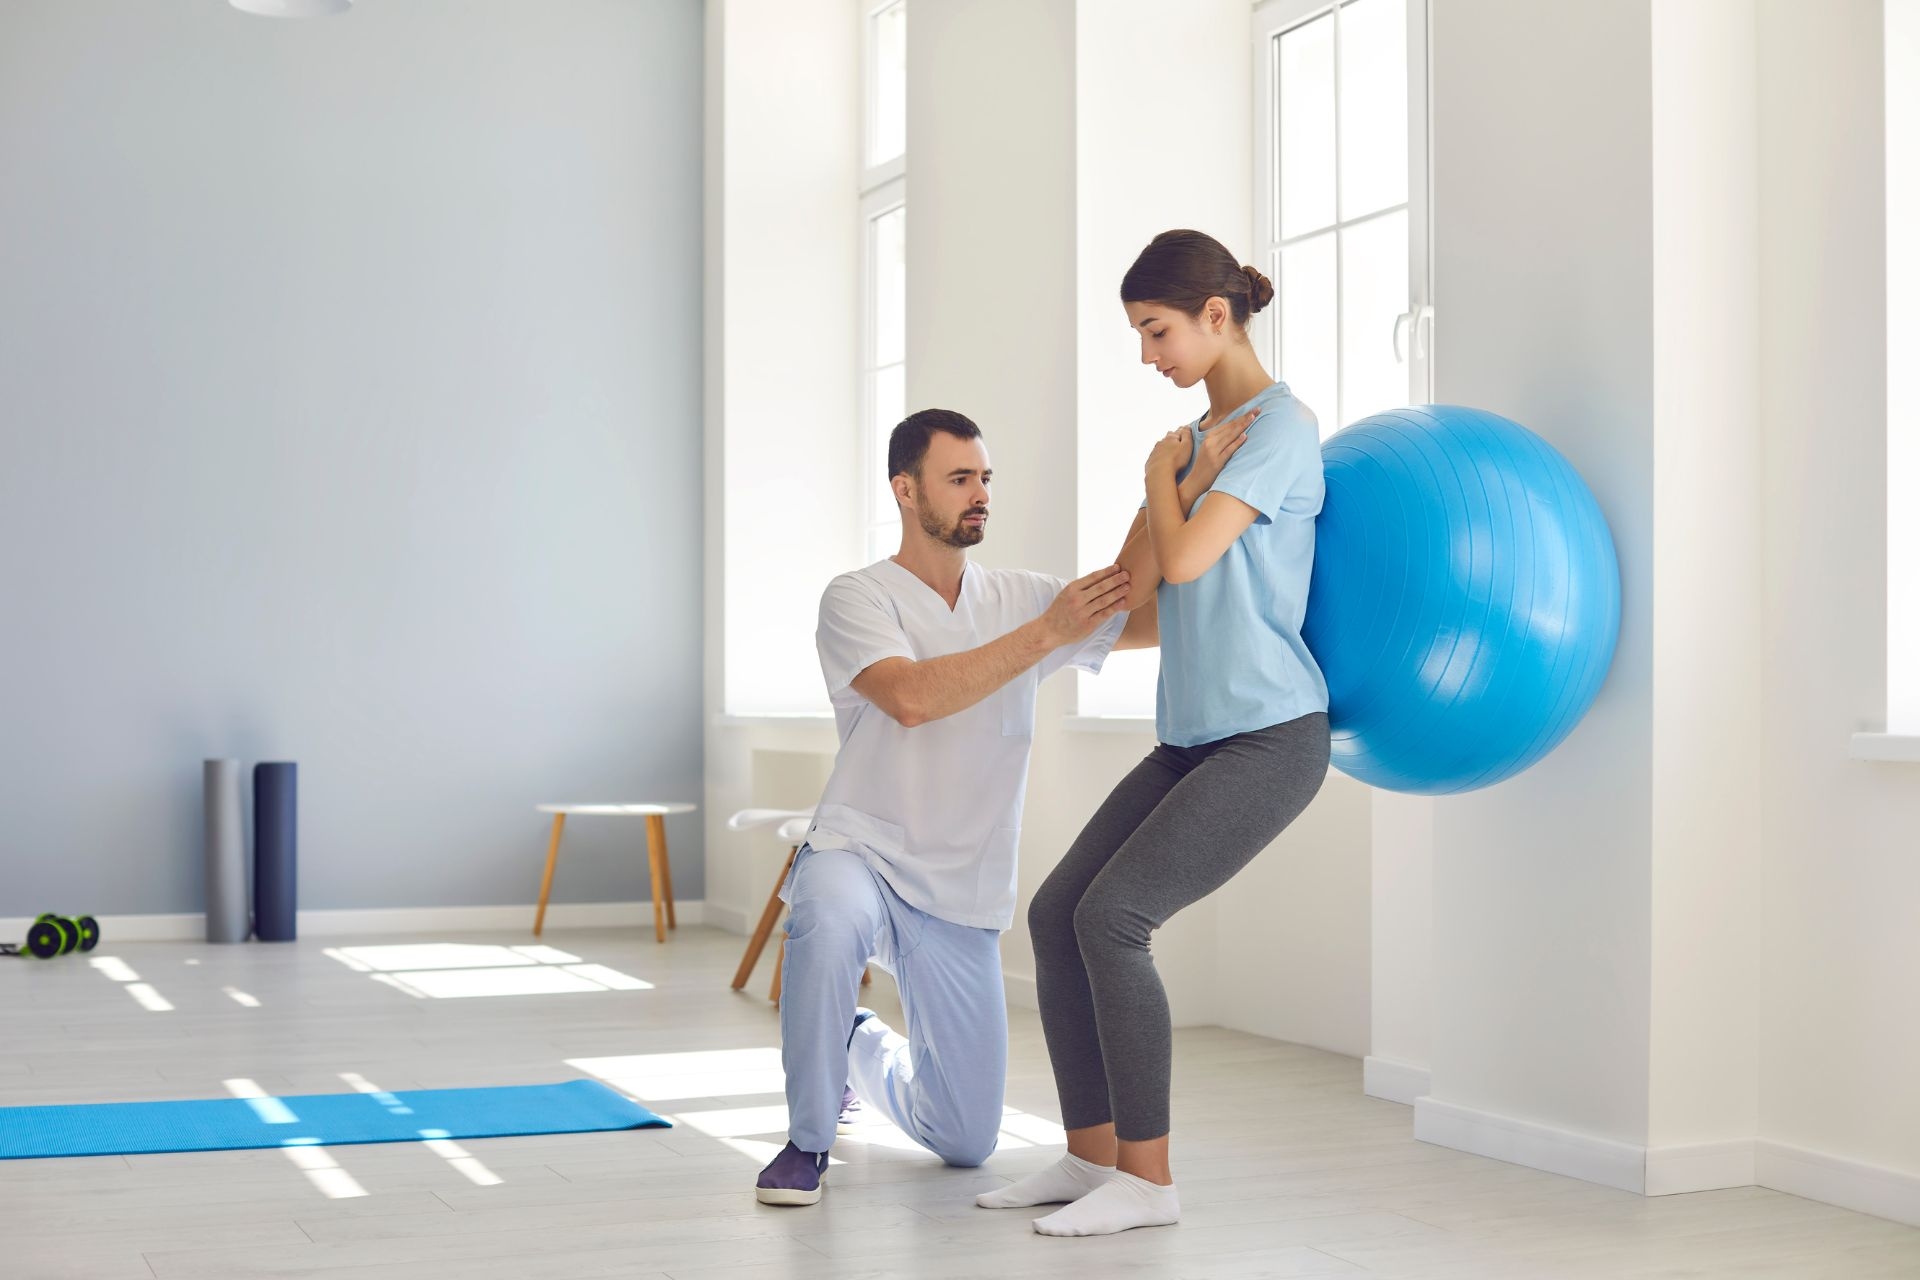 How can someone find a qualified adapted yoga therapist in their area?